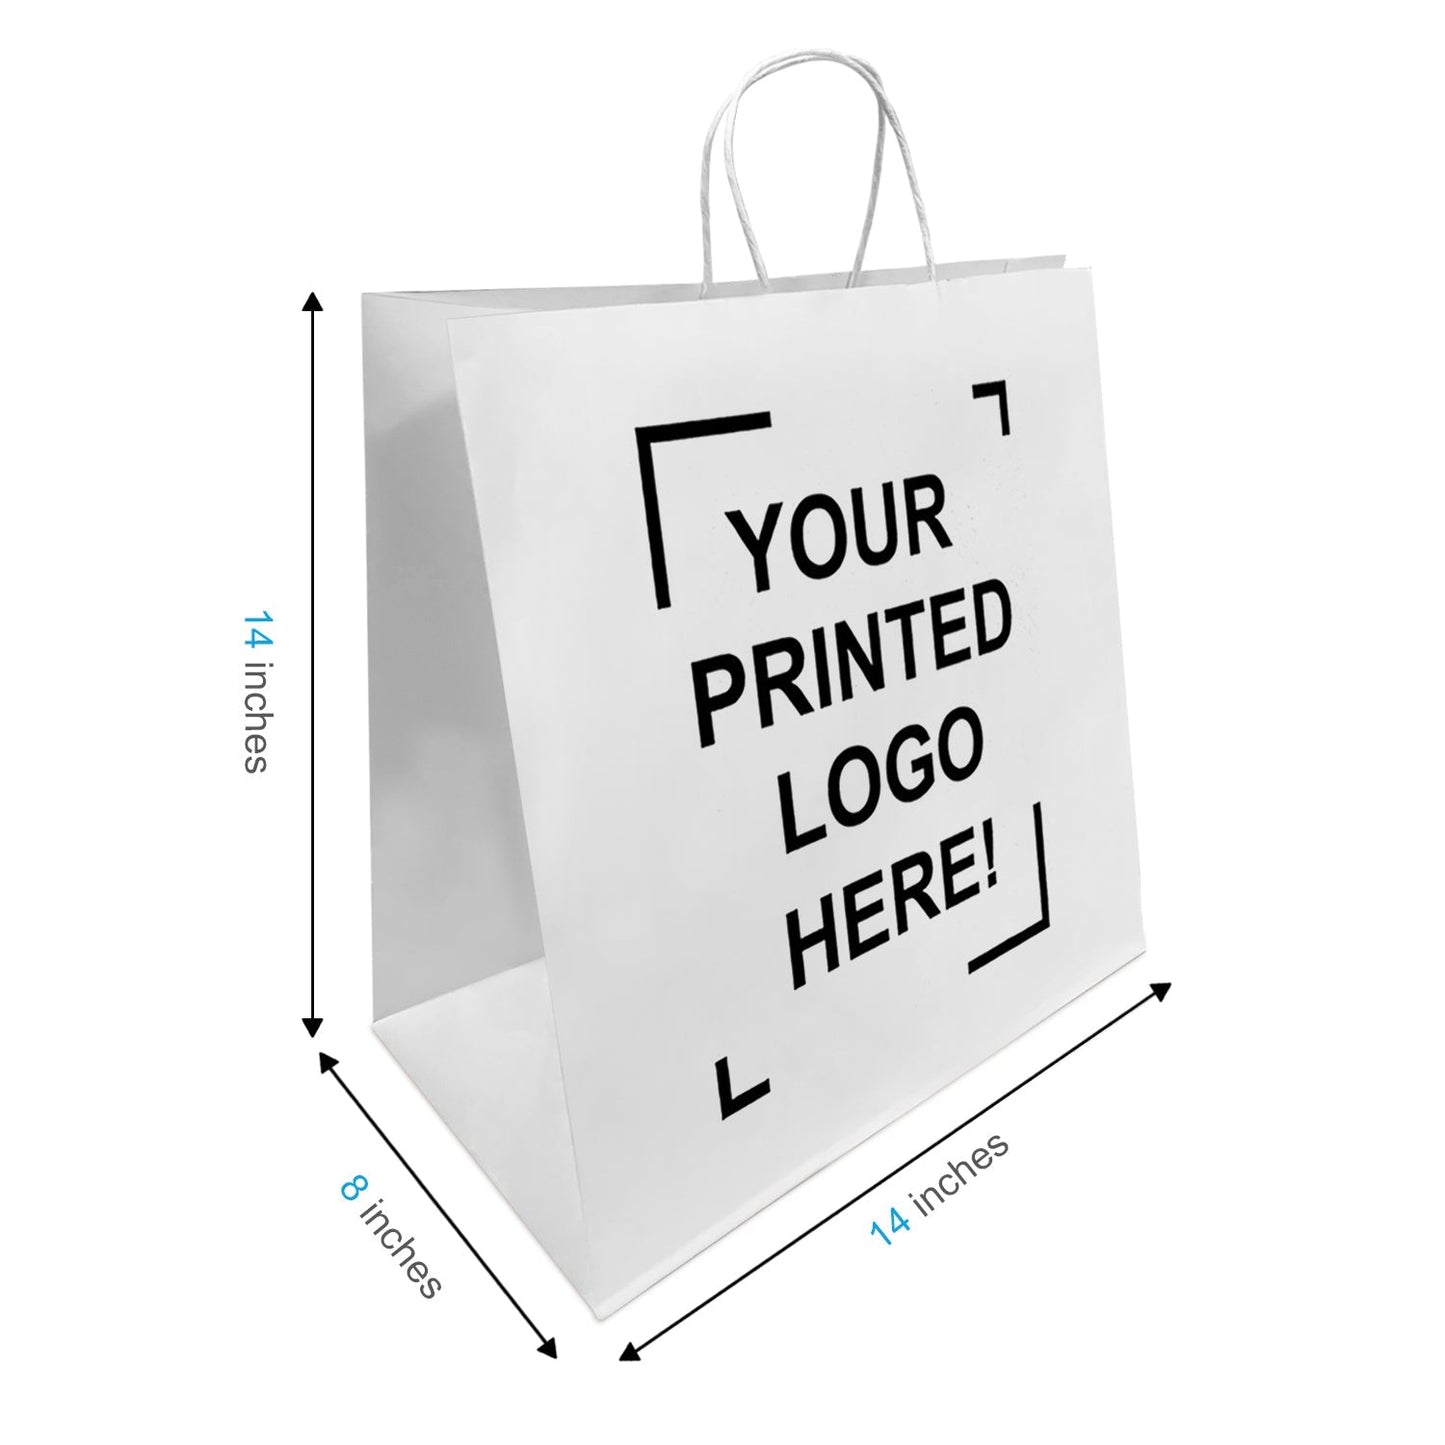 Custom Print Tiger 14x8x14 inches White Paper Bag; $1.85/pc, 100pcs/case, One Side Full Color Printed in North America